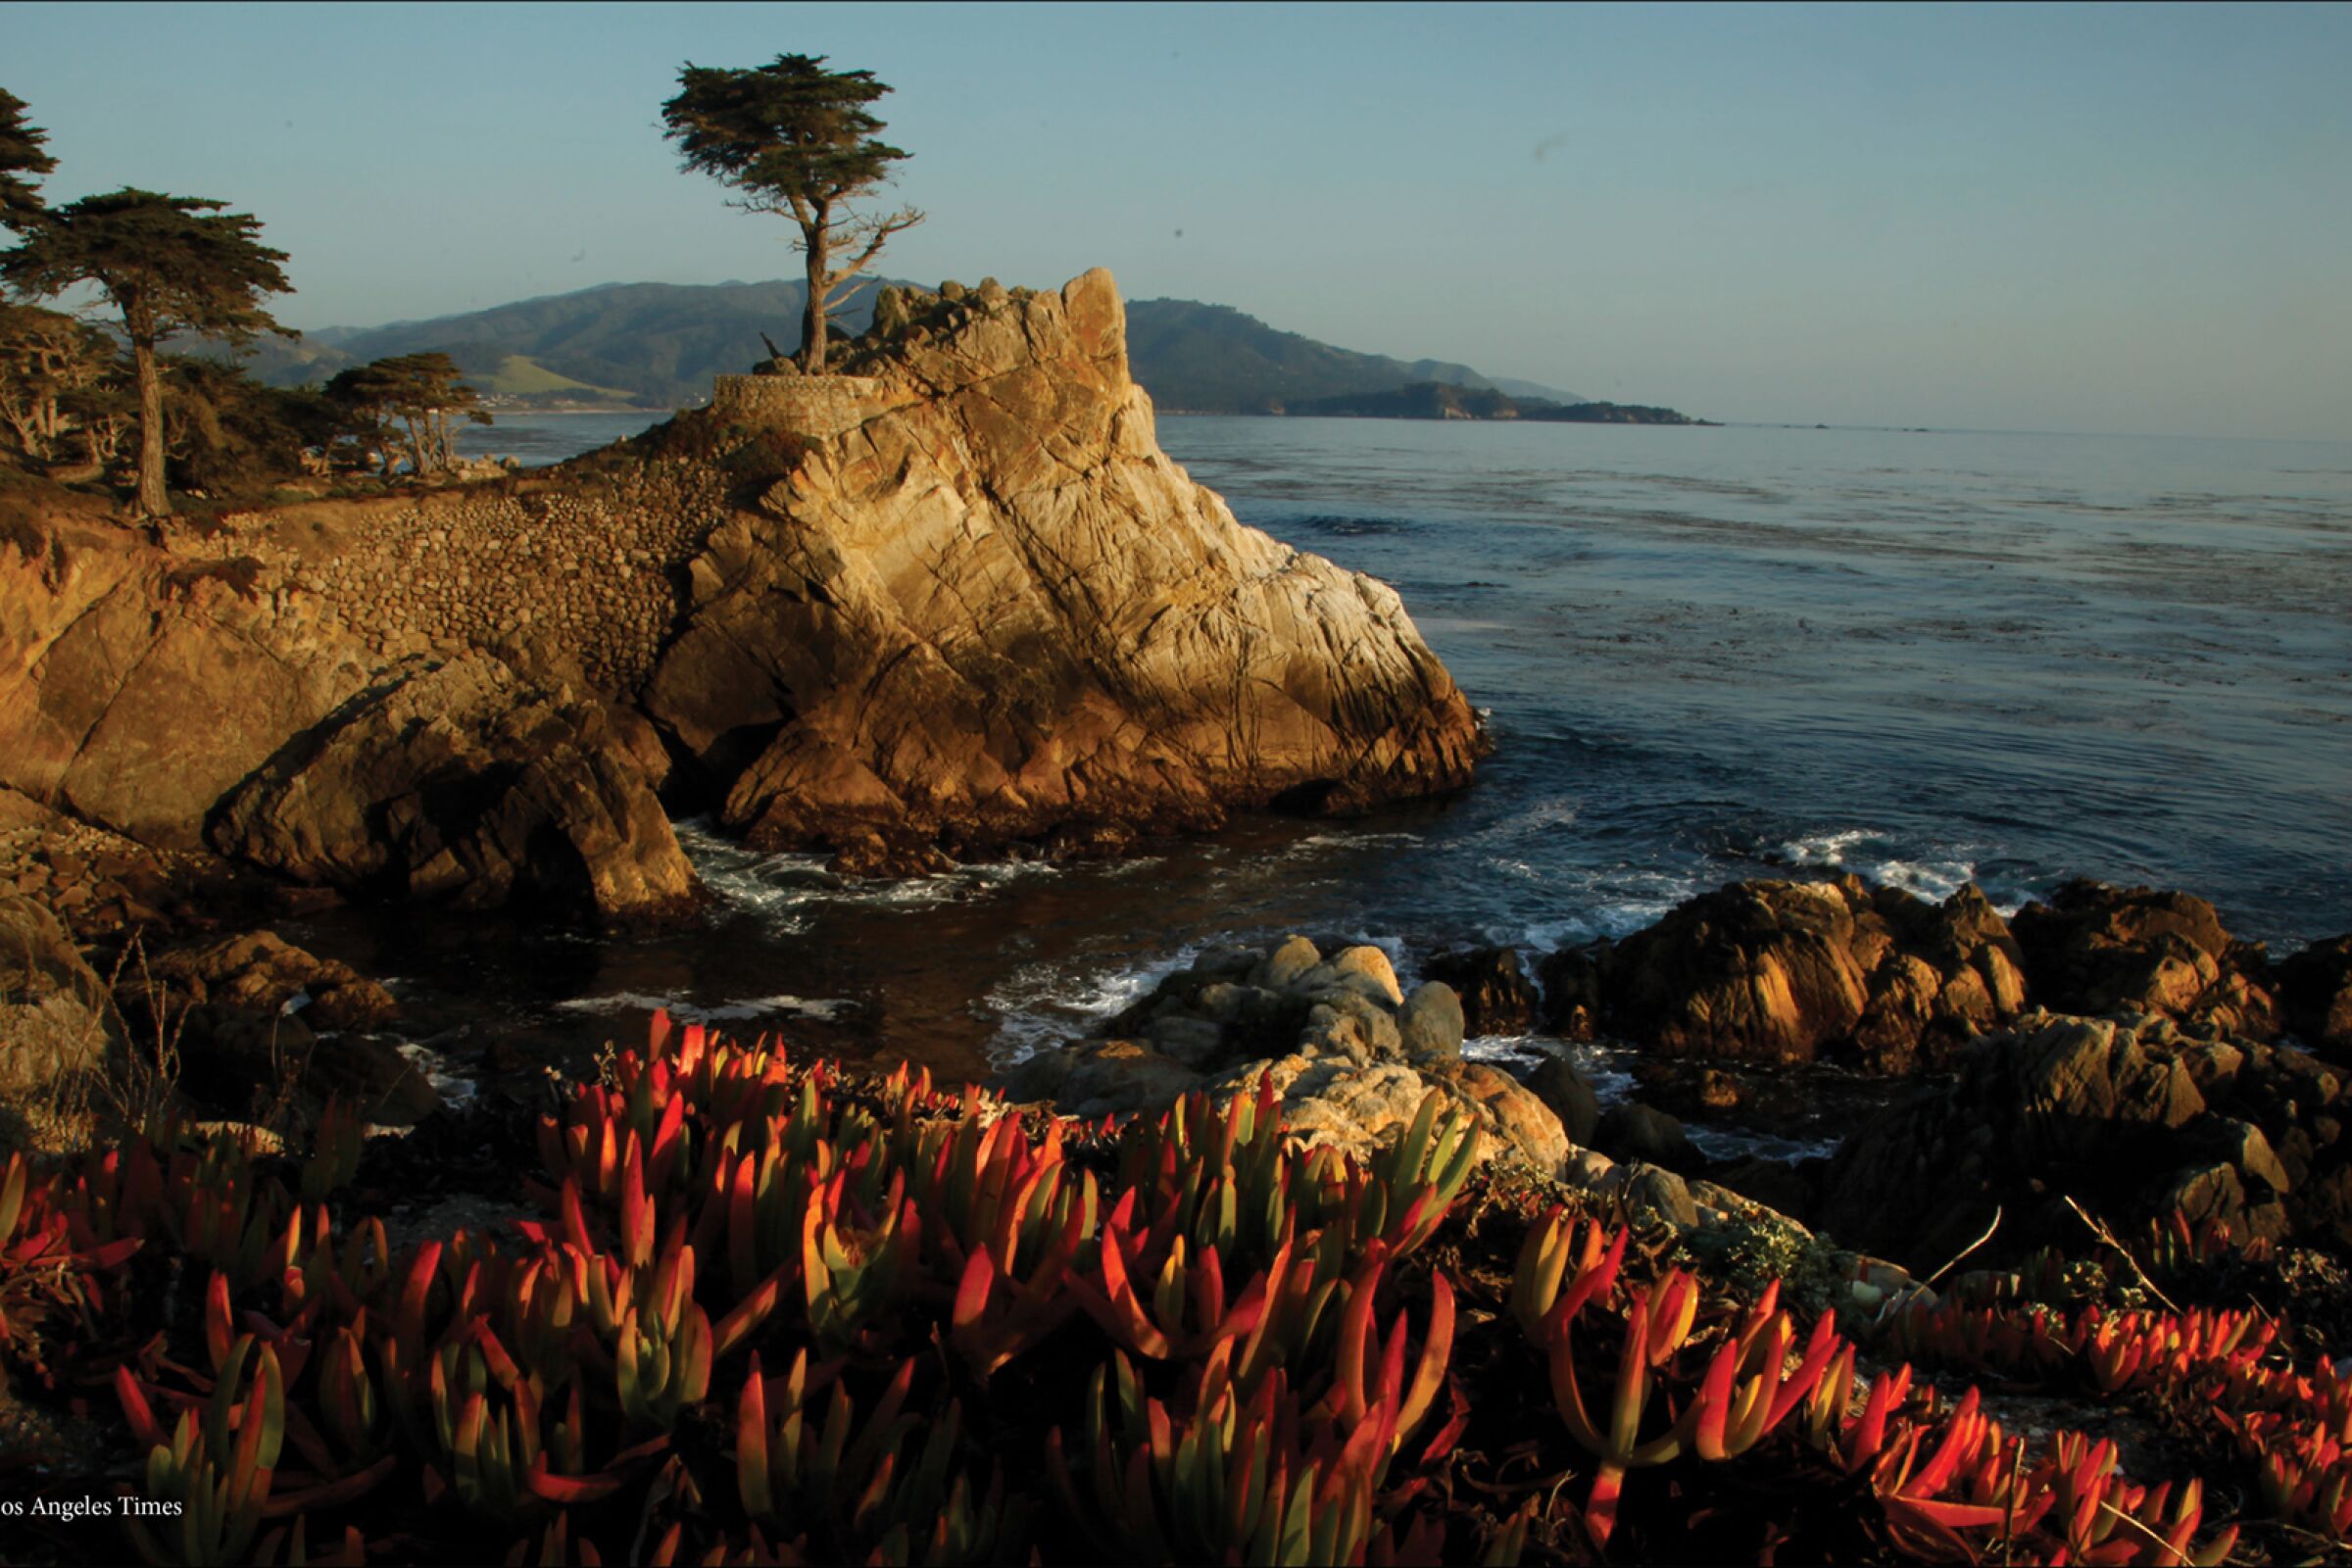 The Lone Cypress, located on a rocky ledge along 17 Mile Drive  south of Carmel.